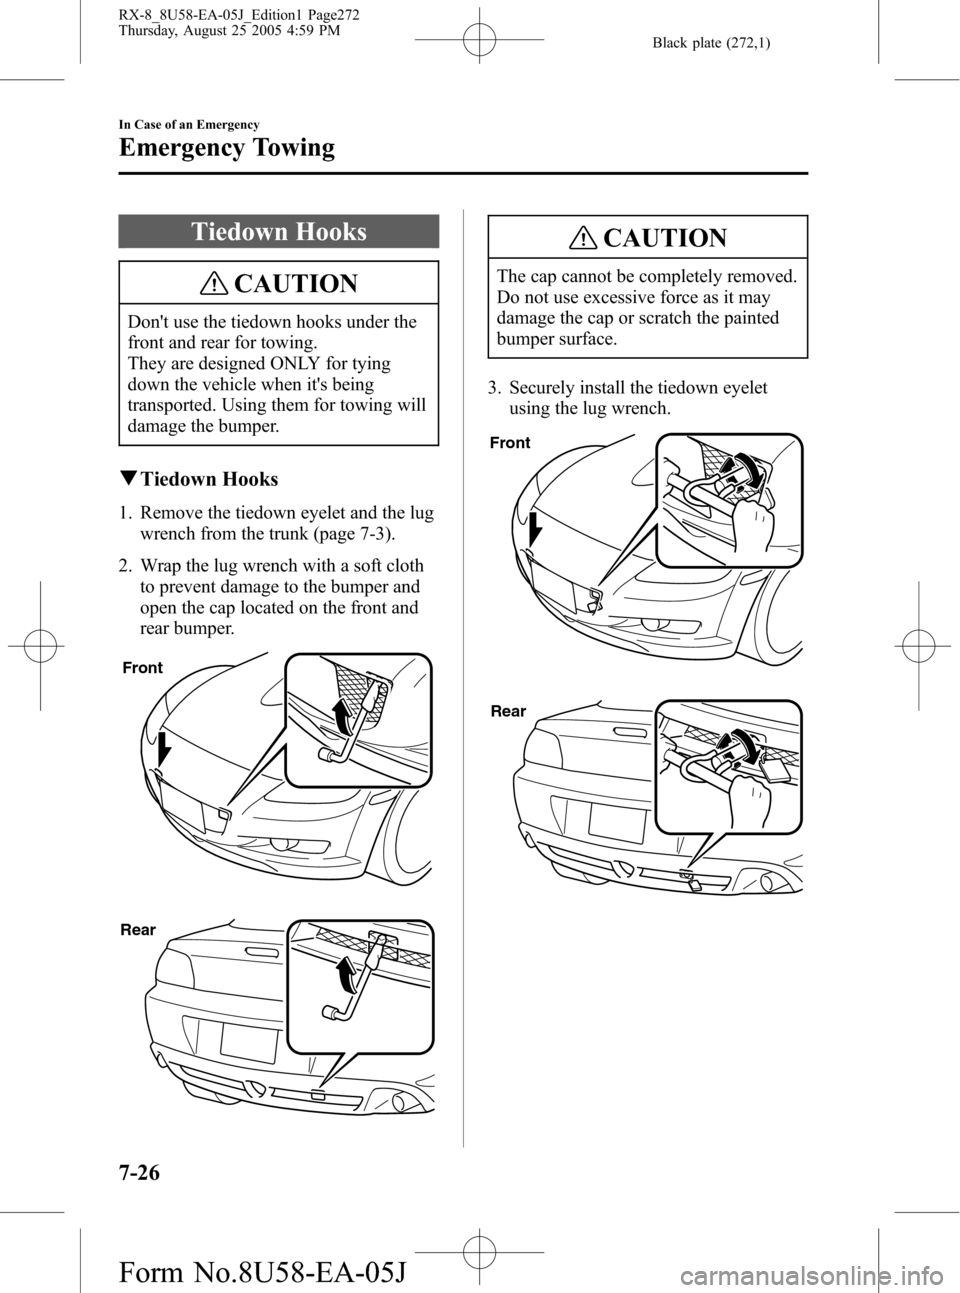 MAZDA MODEL RX 8 2006  Owners Manual (in English) Black plate (272,1)
Tiedown Hooks
CAUTION
Dont use the tiedown hooks under the
front and rear for towing.
They are designed ONLY for tying
down the vehicle when its being
transported. Using them for